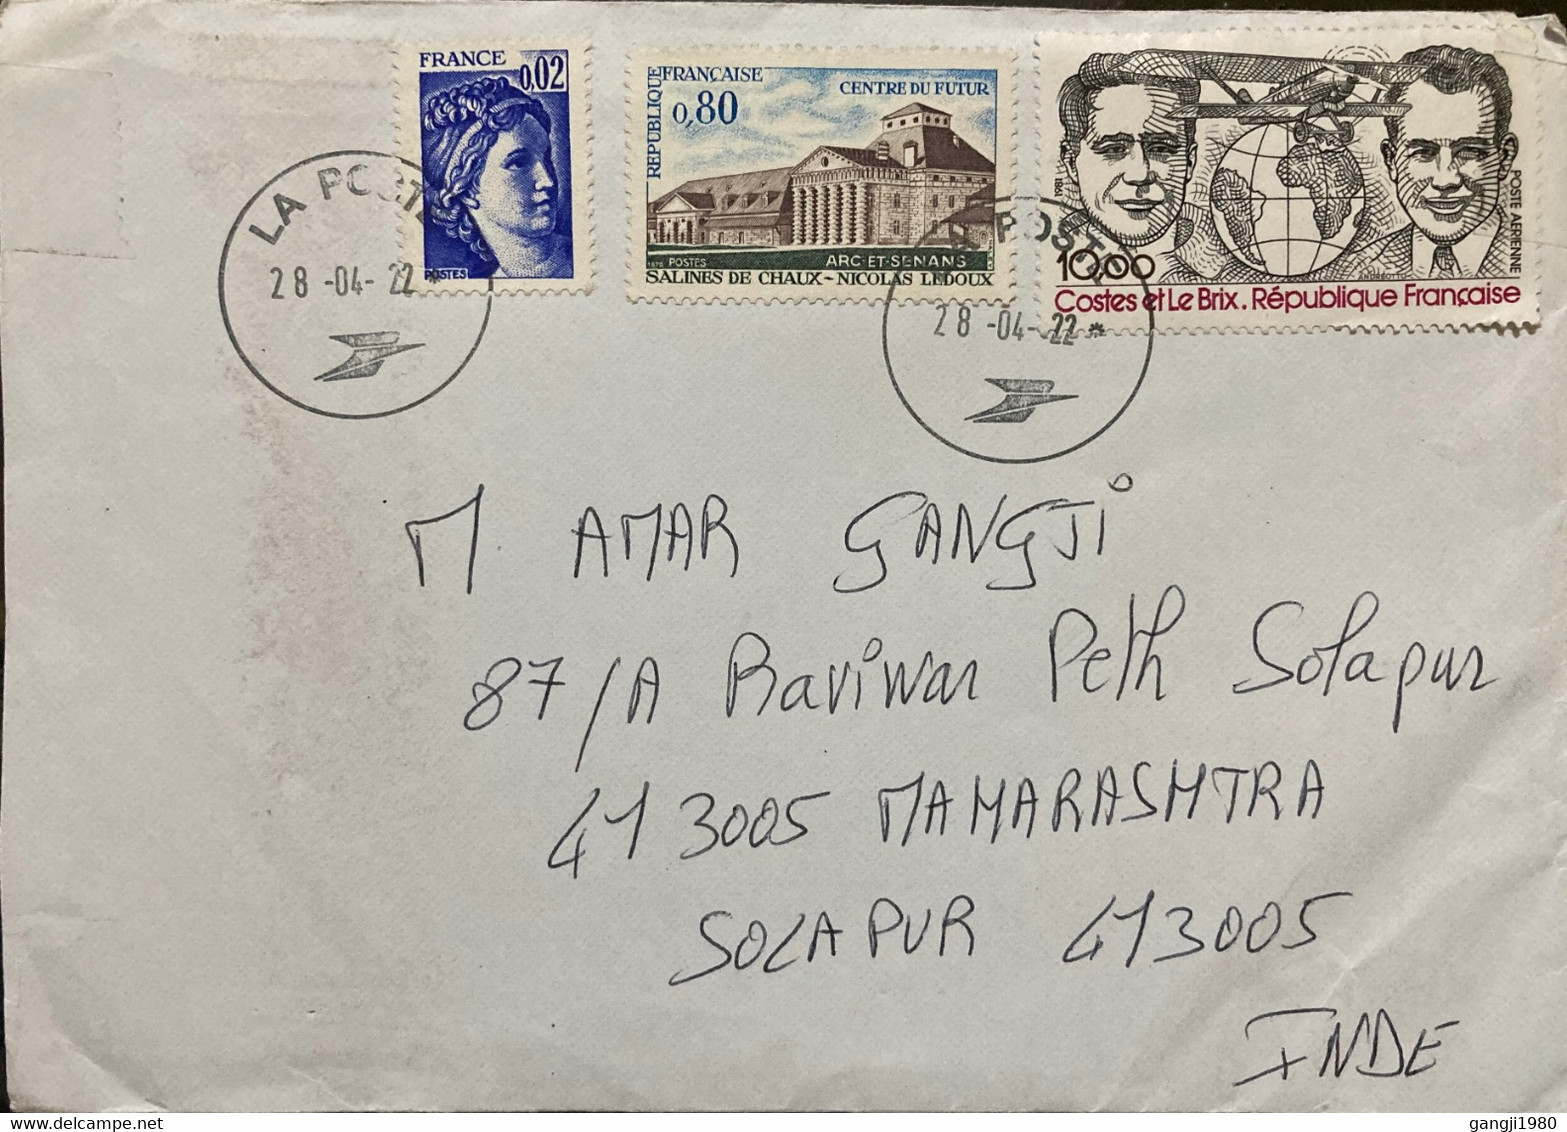 FRANCE 2022, QUEEN,AEROPLANE,GLOBE,BUILDING,ARCHITECTURE,3 STAMPS USED COVER TO INDIA - Storia Postale